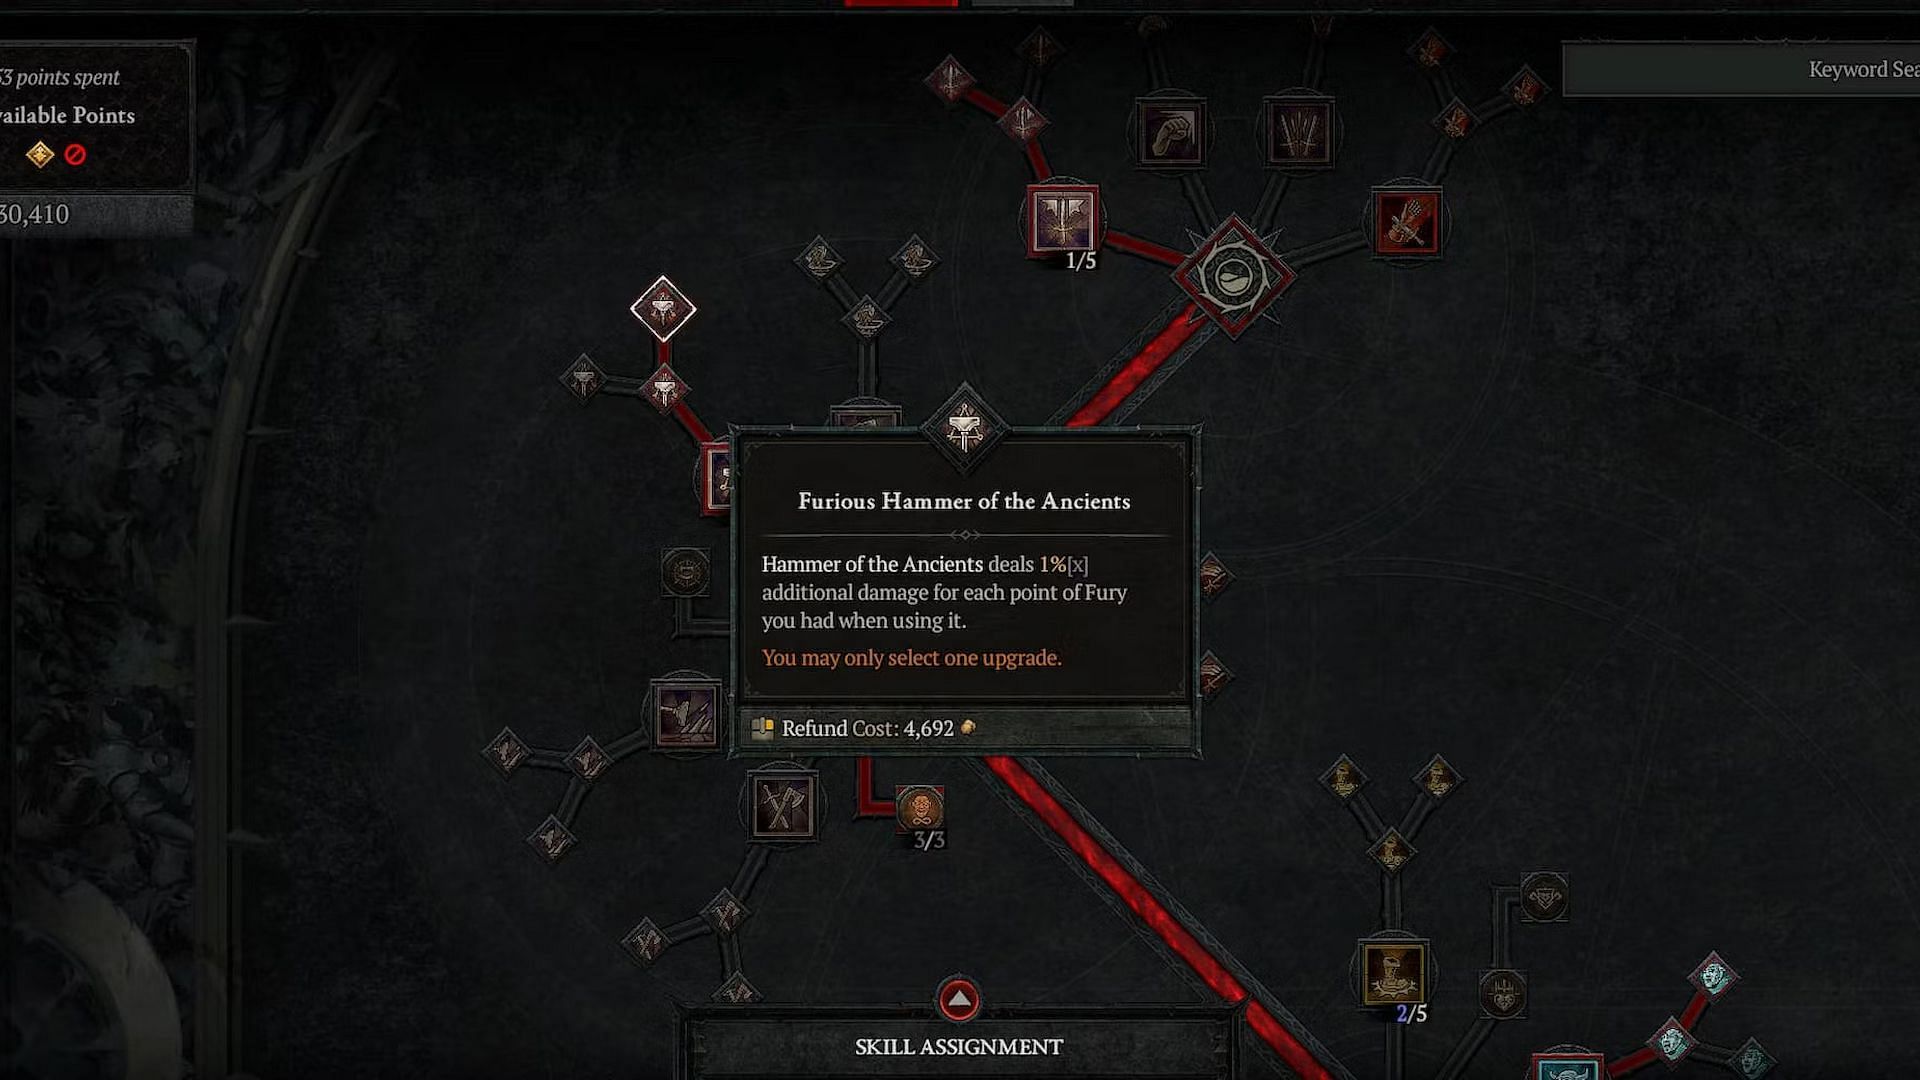 You must acquire all Hammer of the Ancients upgrades (Image via Diablo 4)